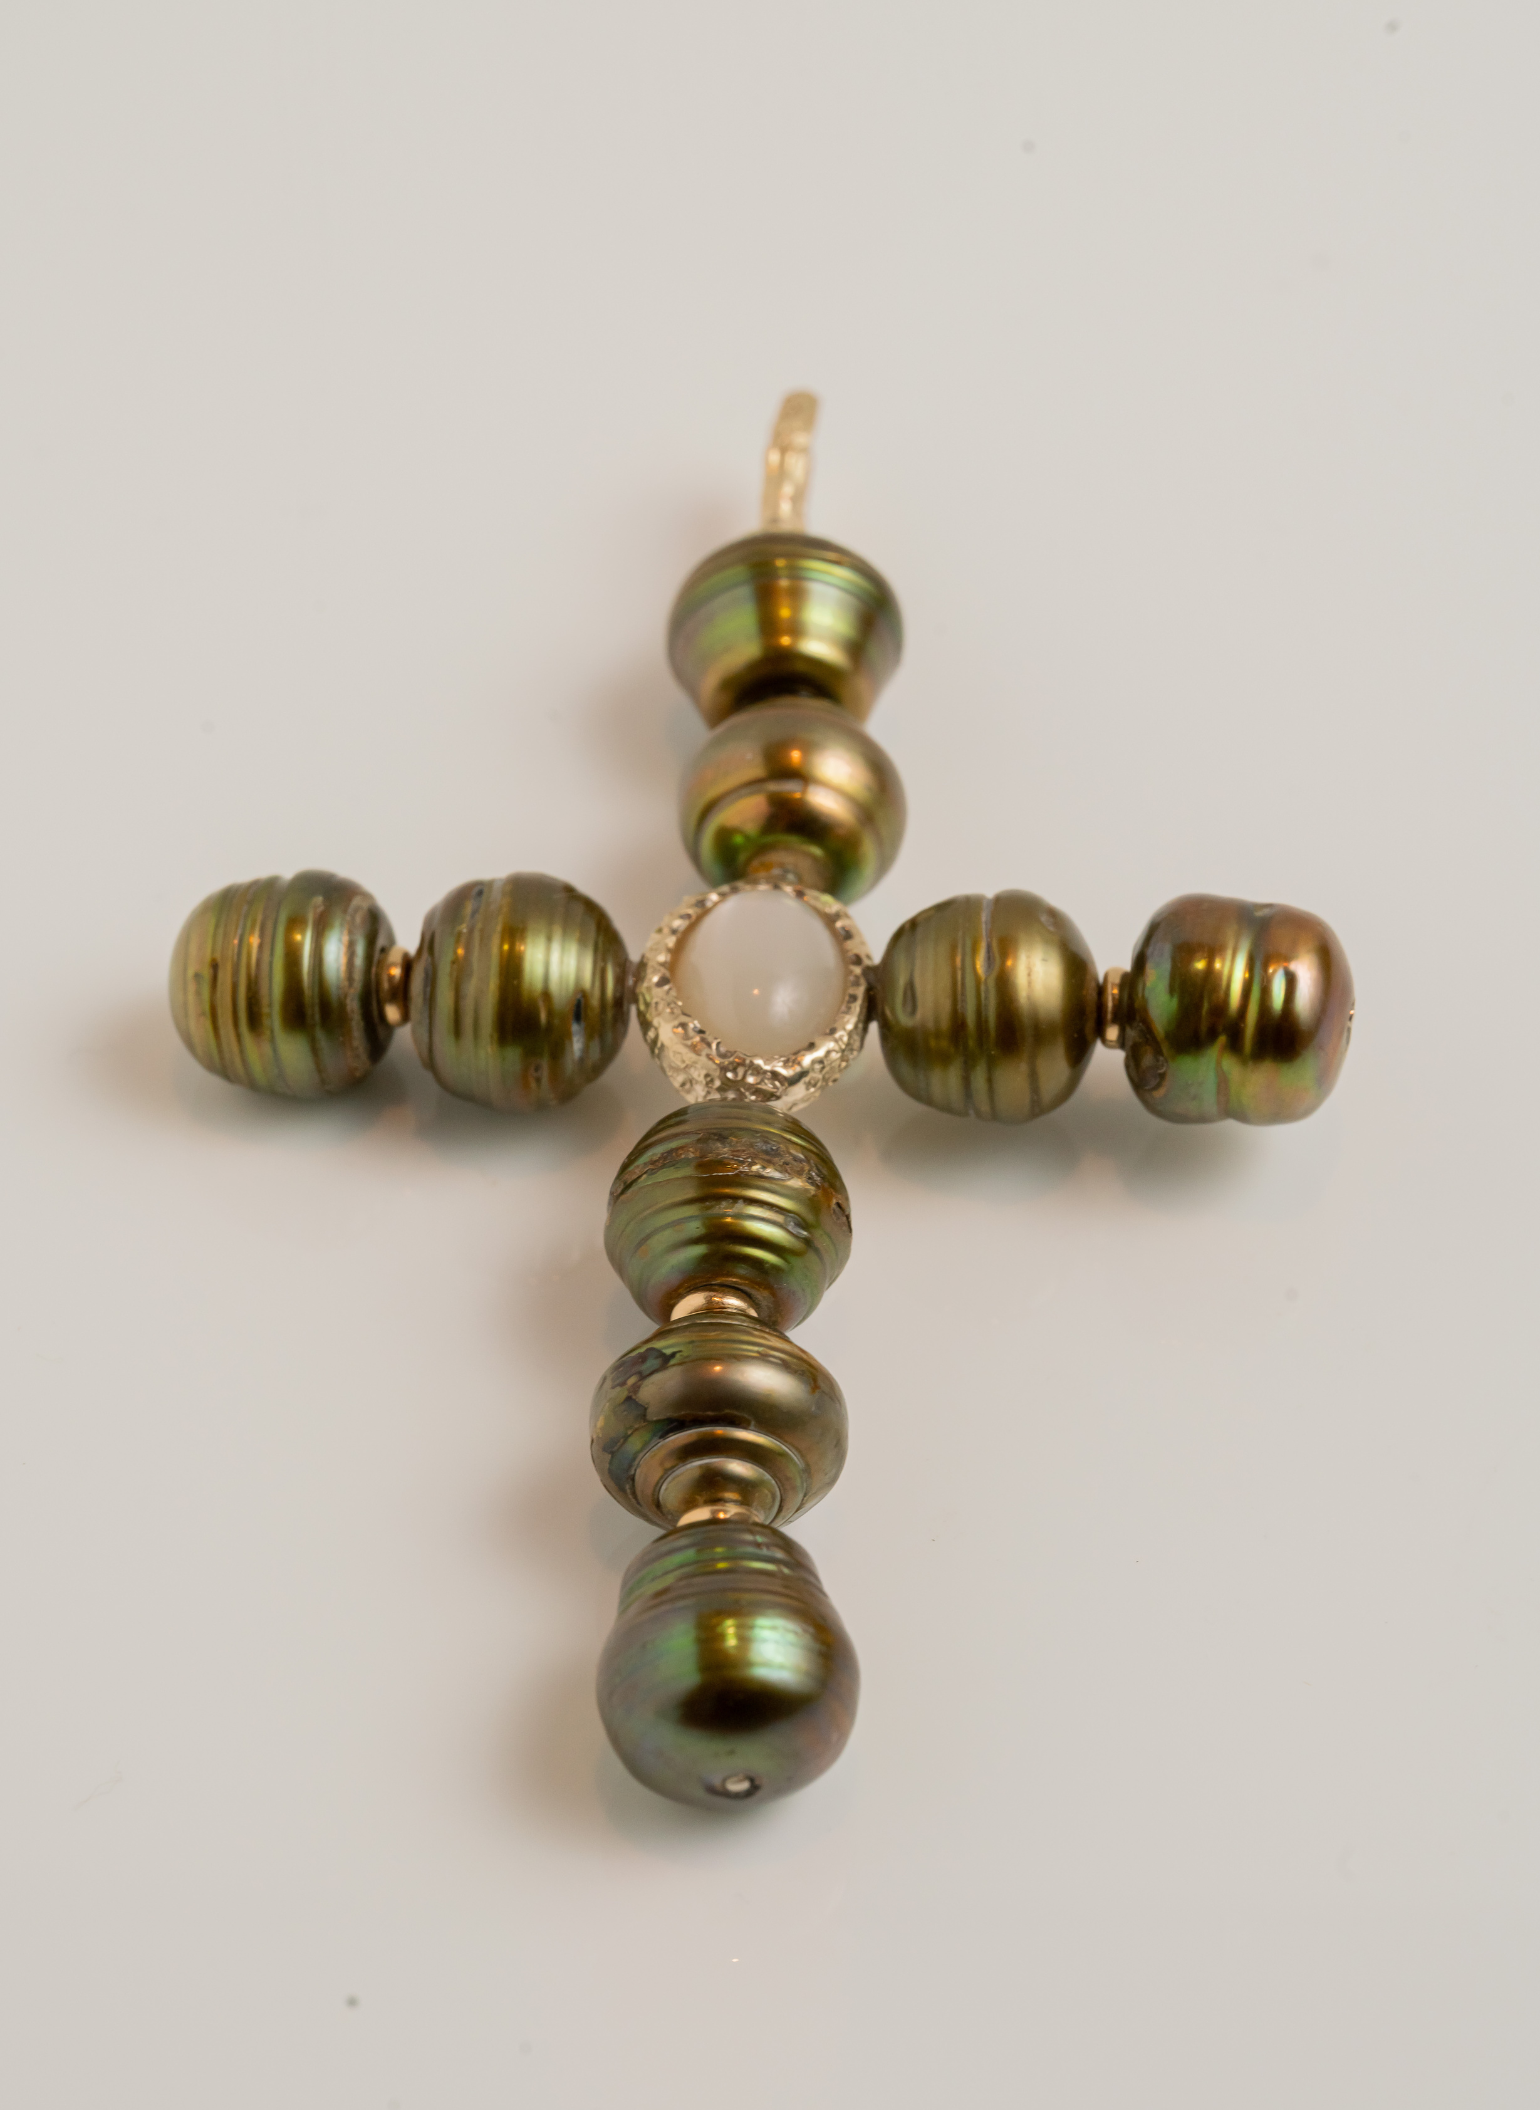 Dolce Far Niente Latin Cross Pendant with Dark Pearls and Agate